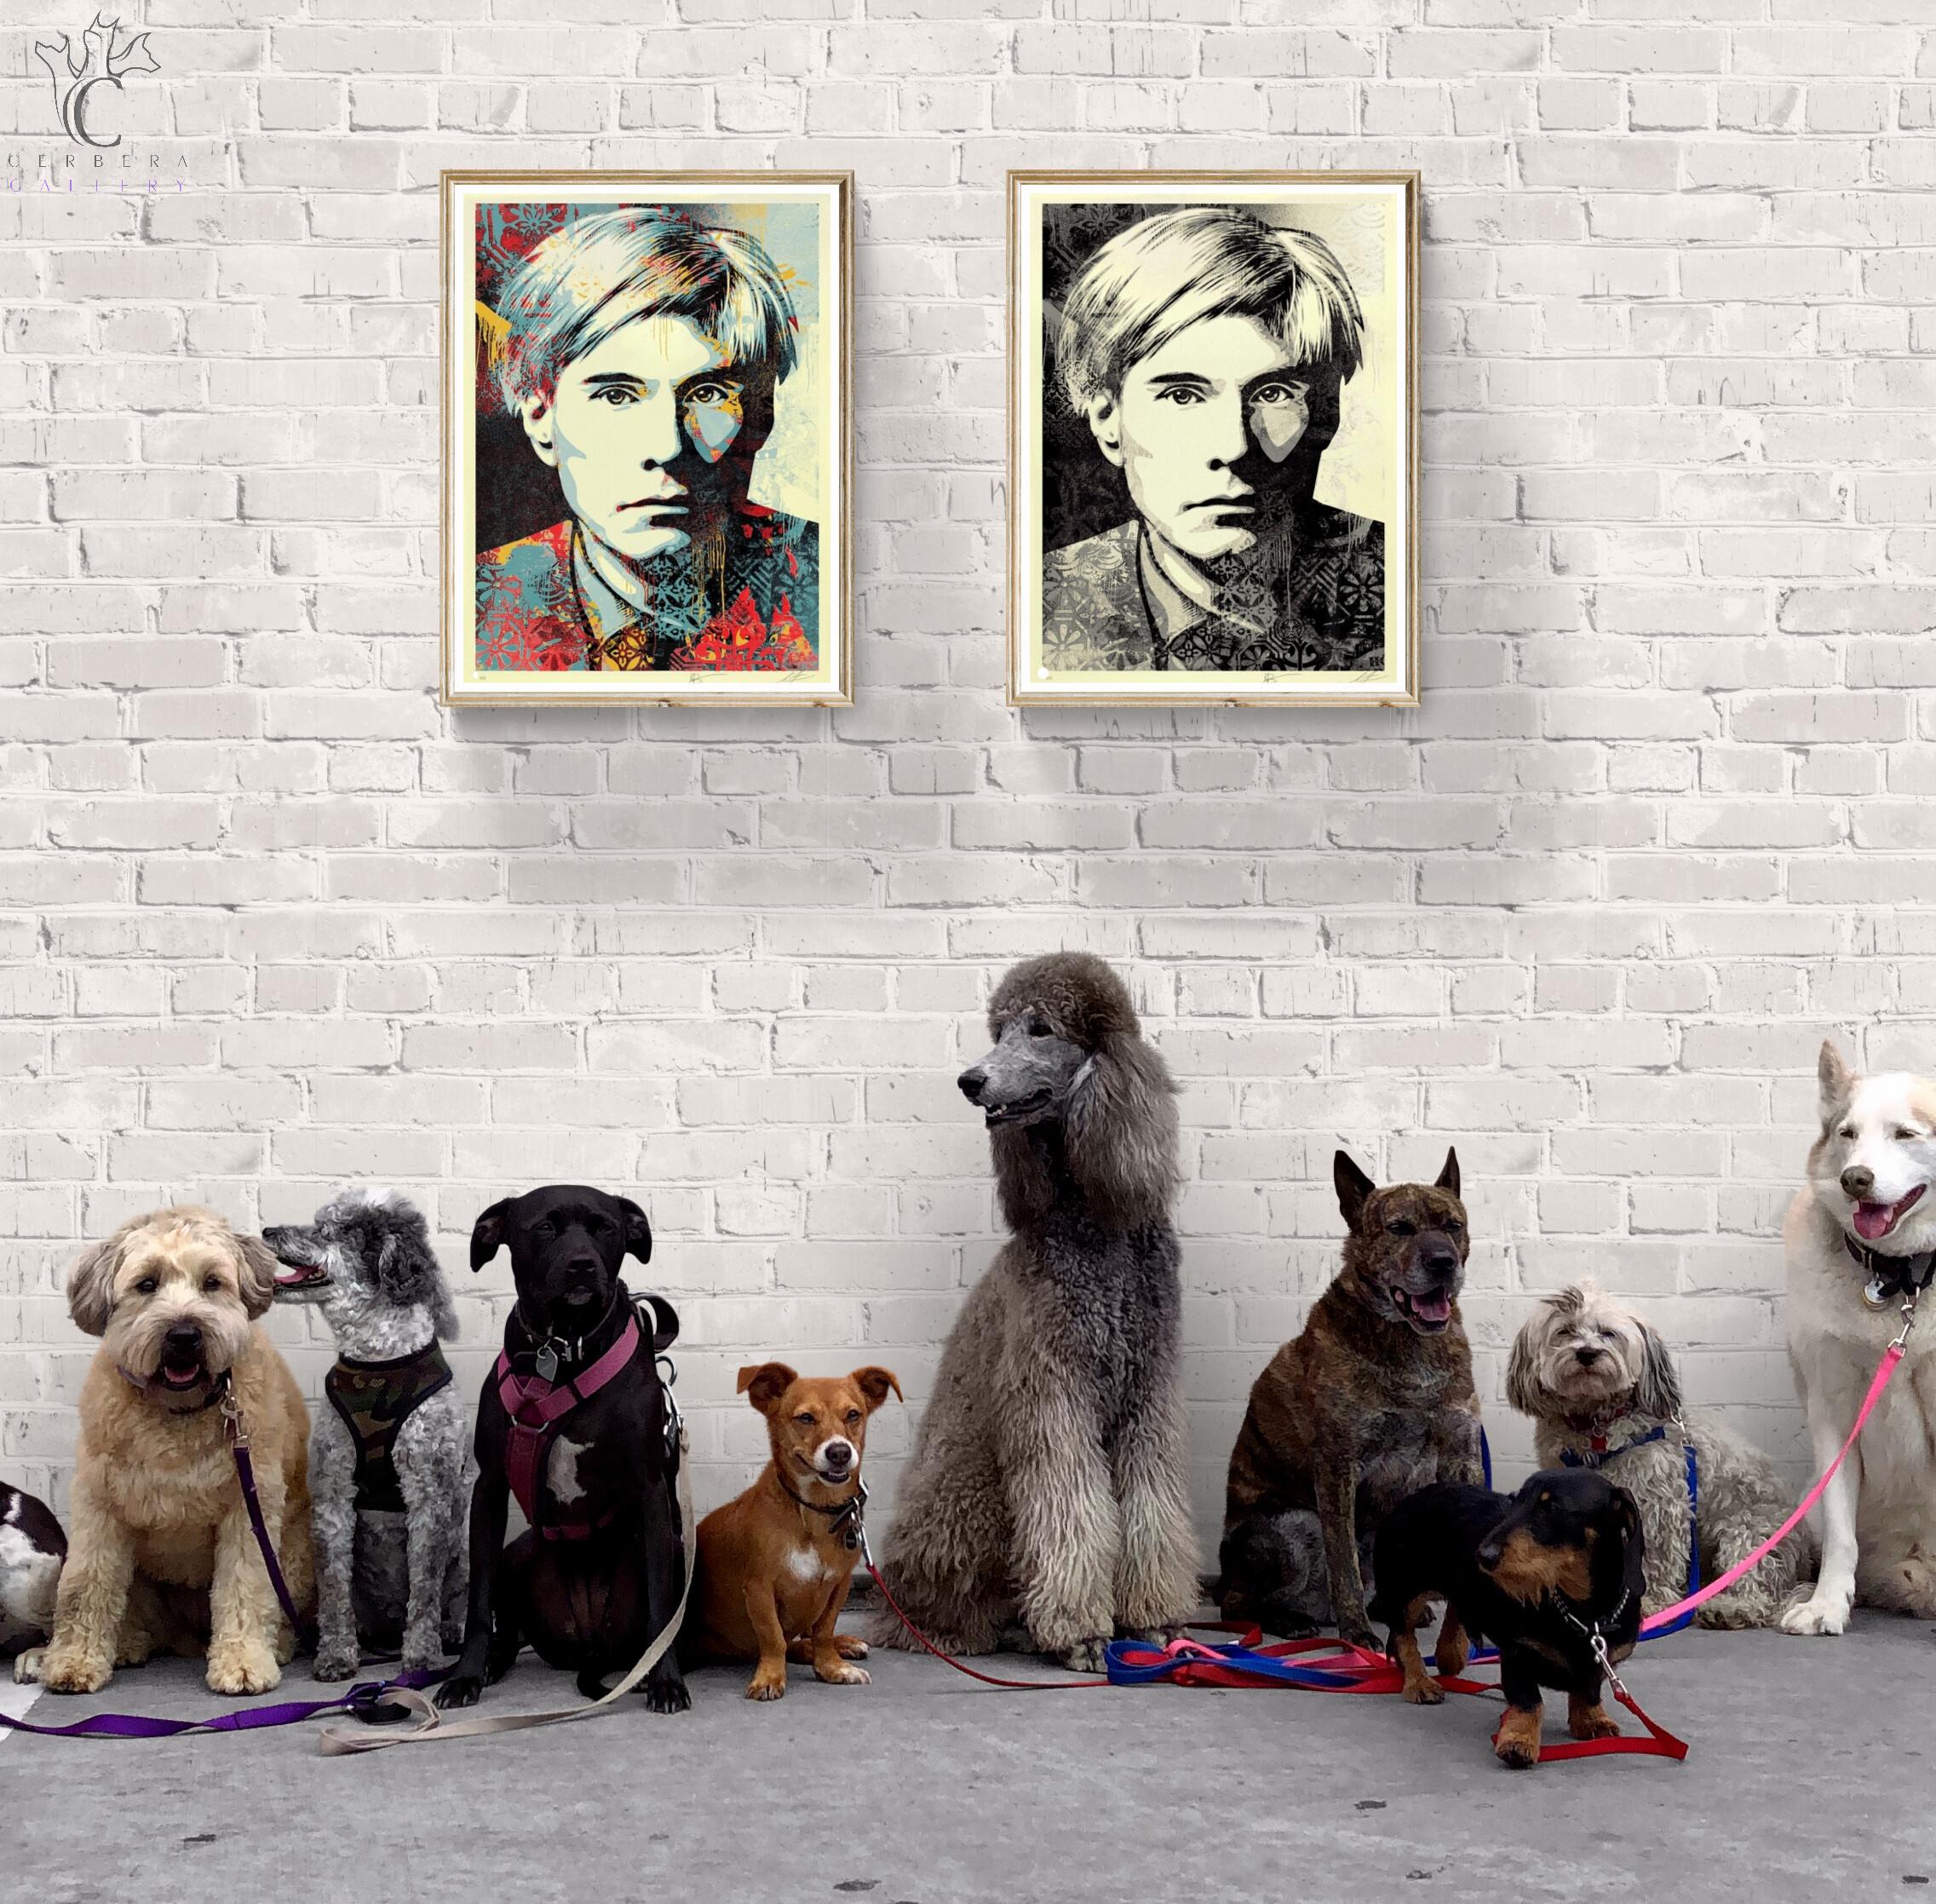 Shepard Fairey
Warhol Collage Set (Iconic, Sophisticated, Color Theory, Pop Culture, Interview Magazine, Velvet Underground)
Screenprint on thick cream Speckletone paper
Year: 2023
Size: 24x18 inches (each)
Edition: 300
Signed by Shepard Fairey and